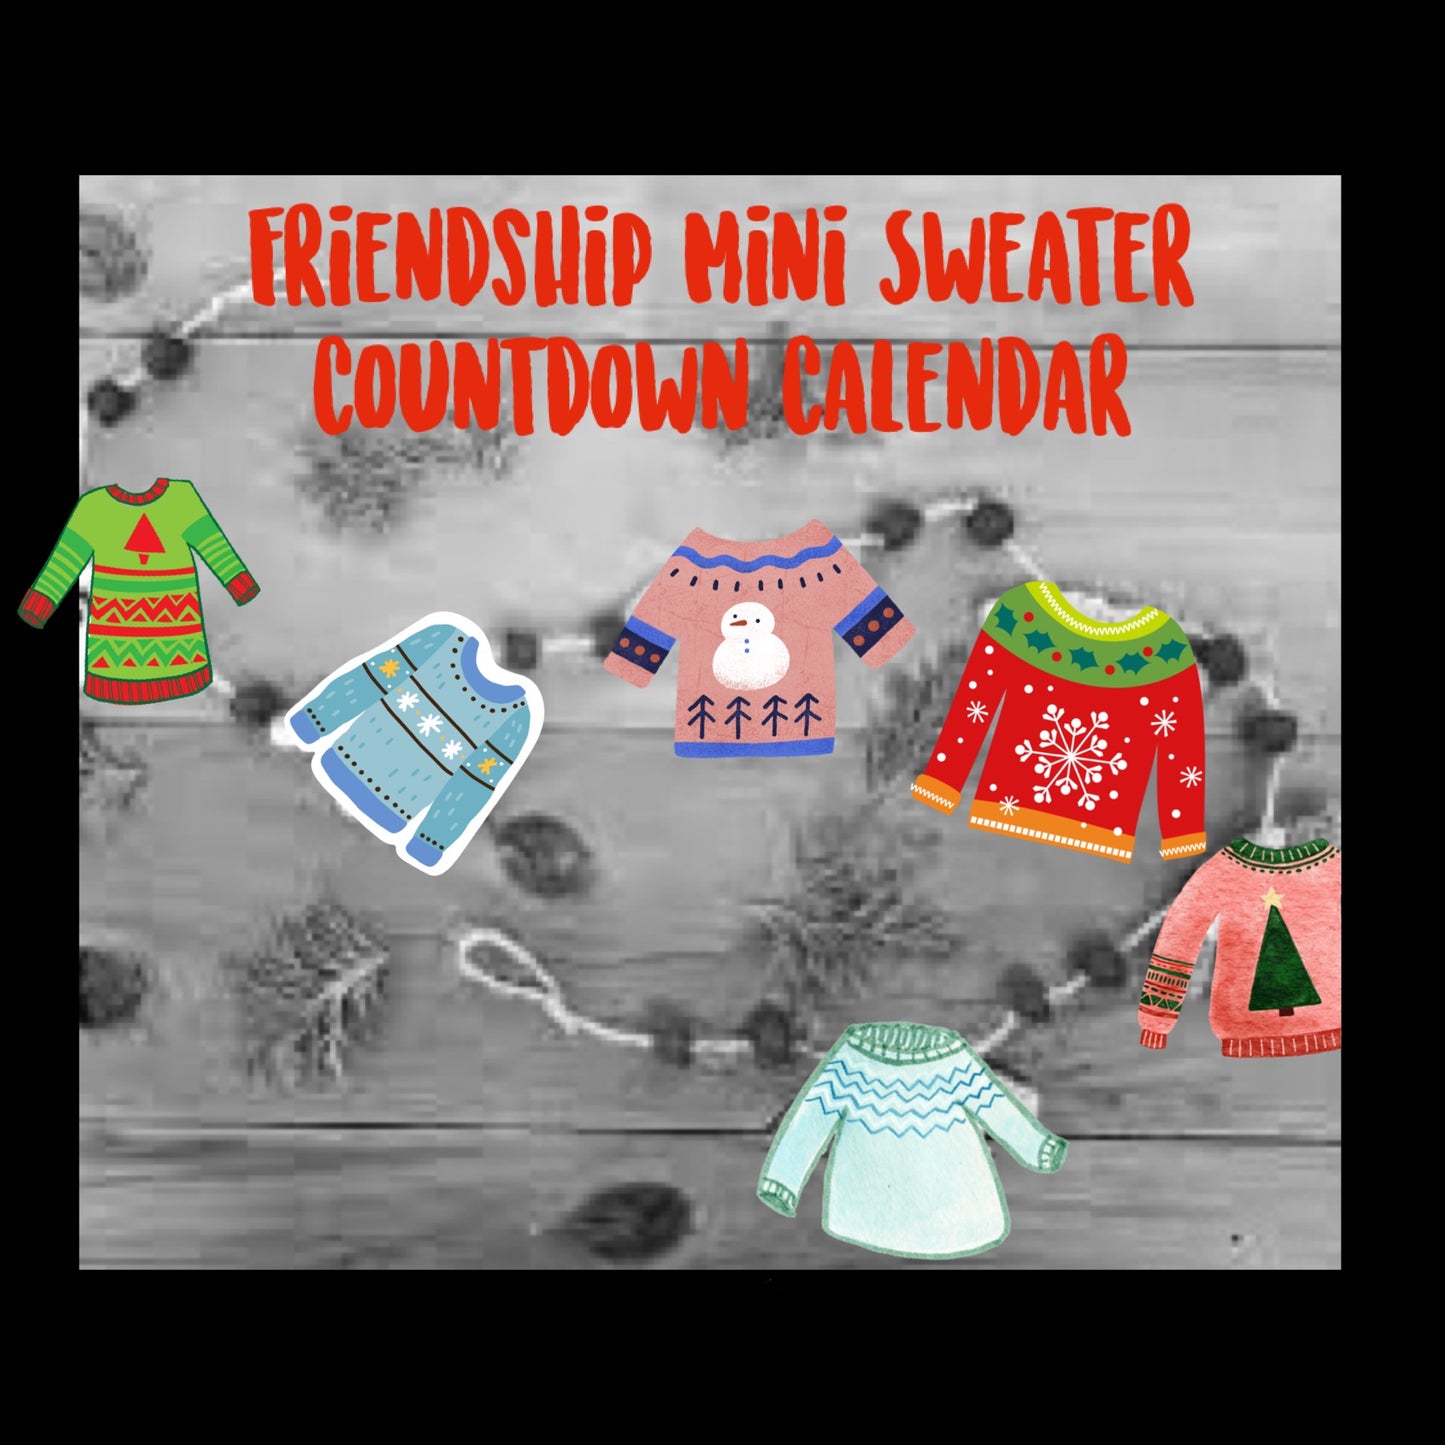 PRE-ORDER FOR 12 OR 24 DAY FRIENDSHIP MINI SWEATER COUNTDOWN CALENDAR ....PLEASE CHOOSE SIZE FROM MENU